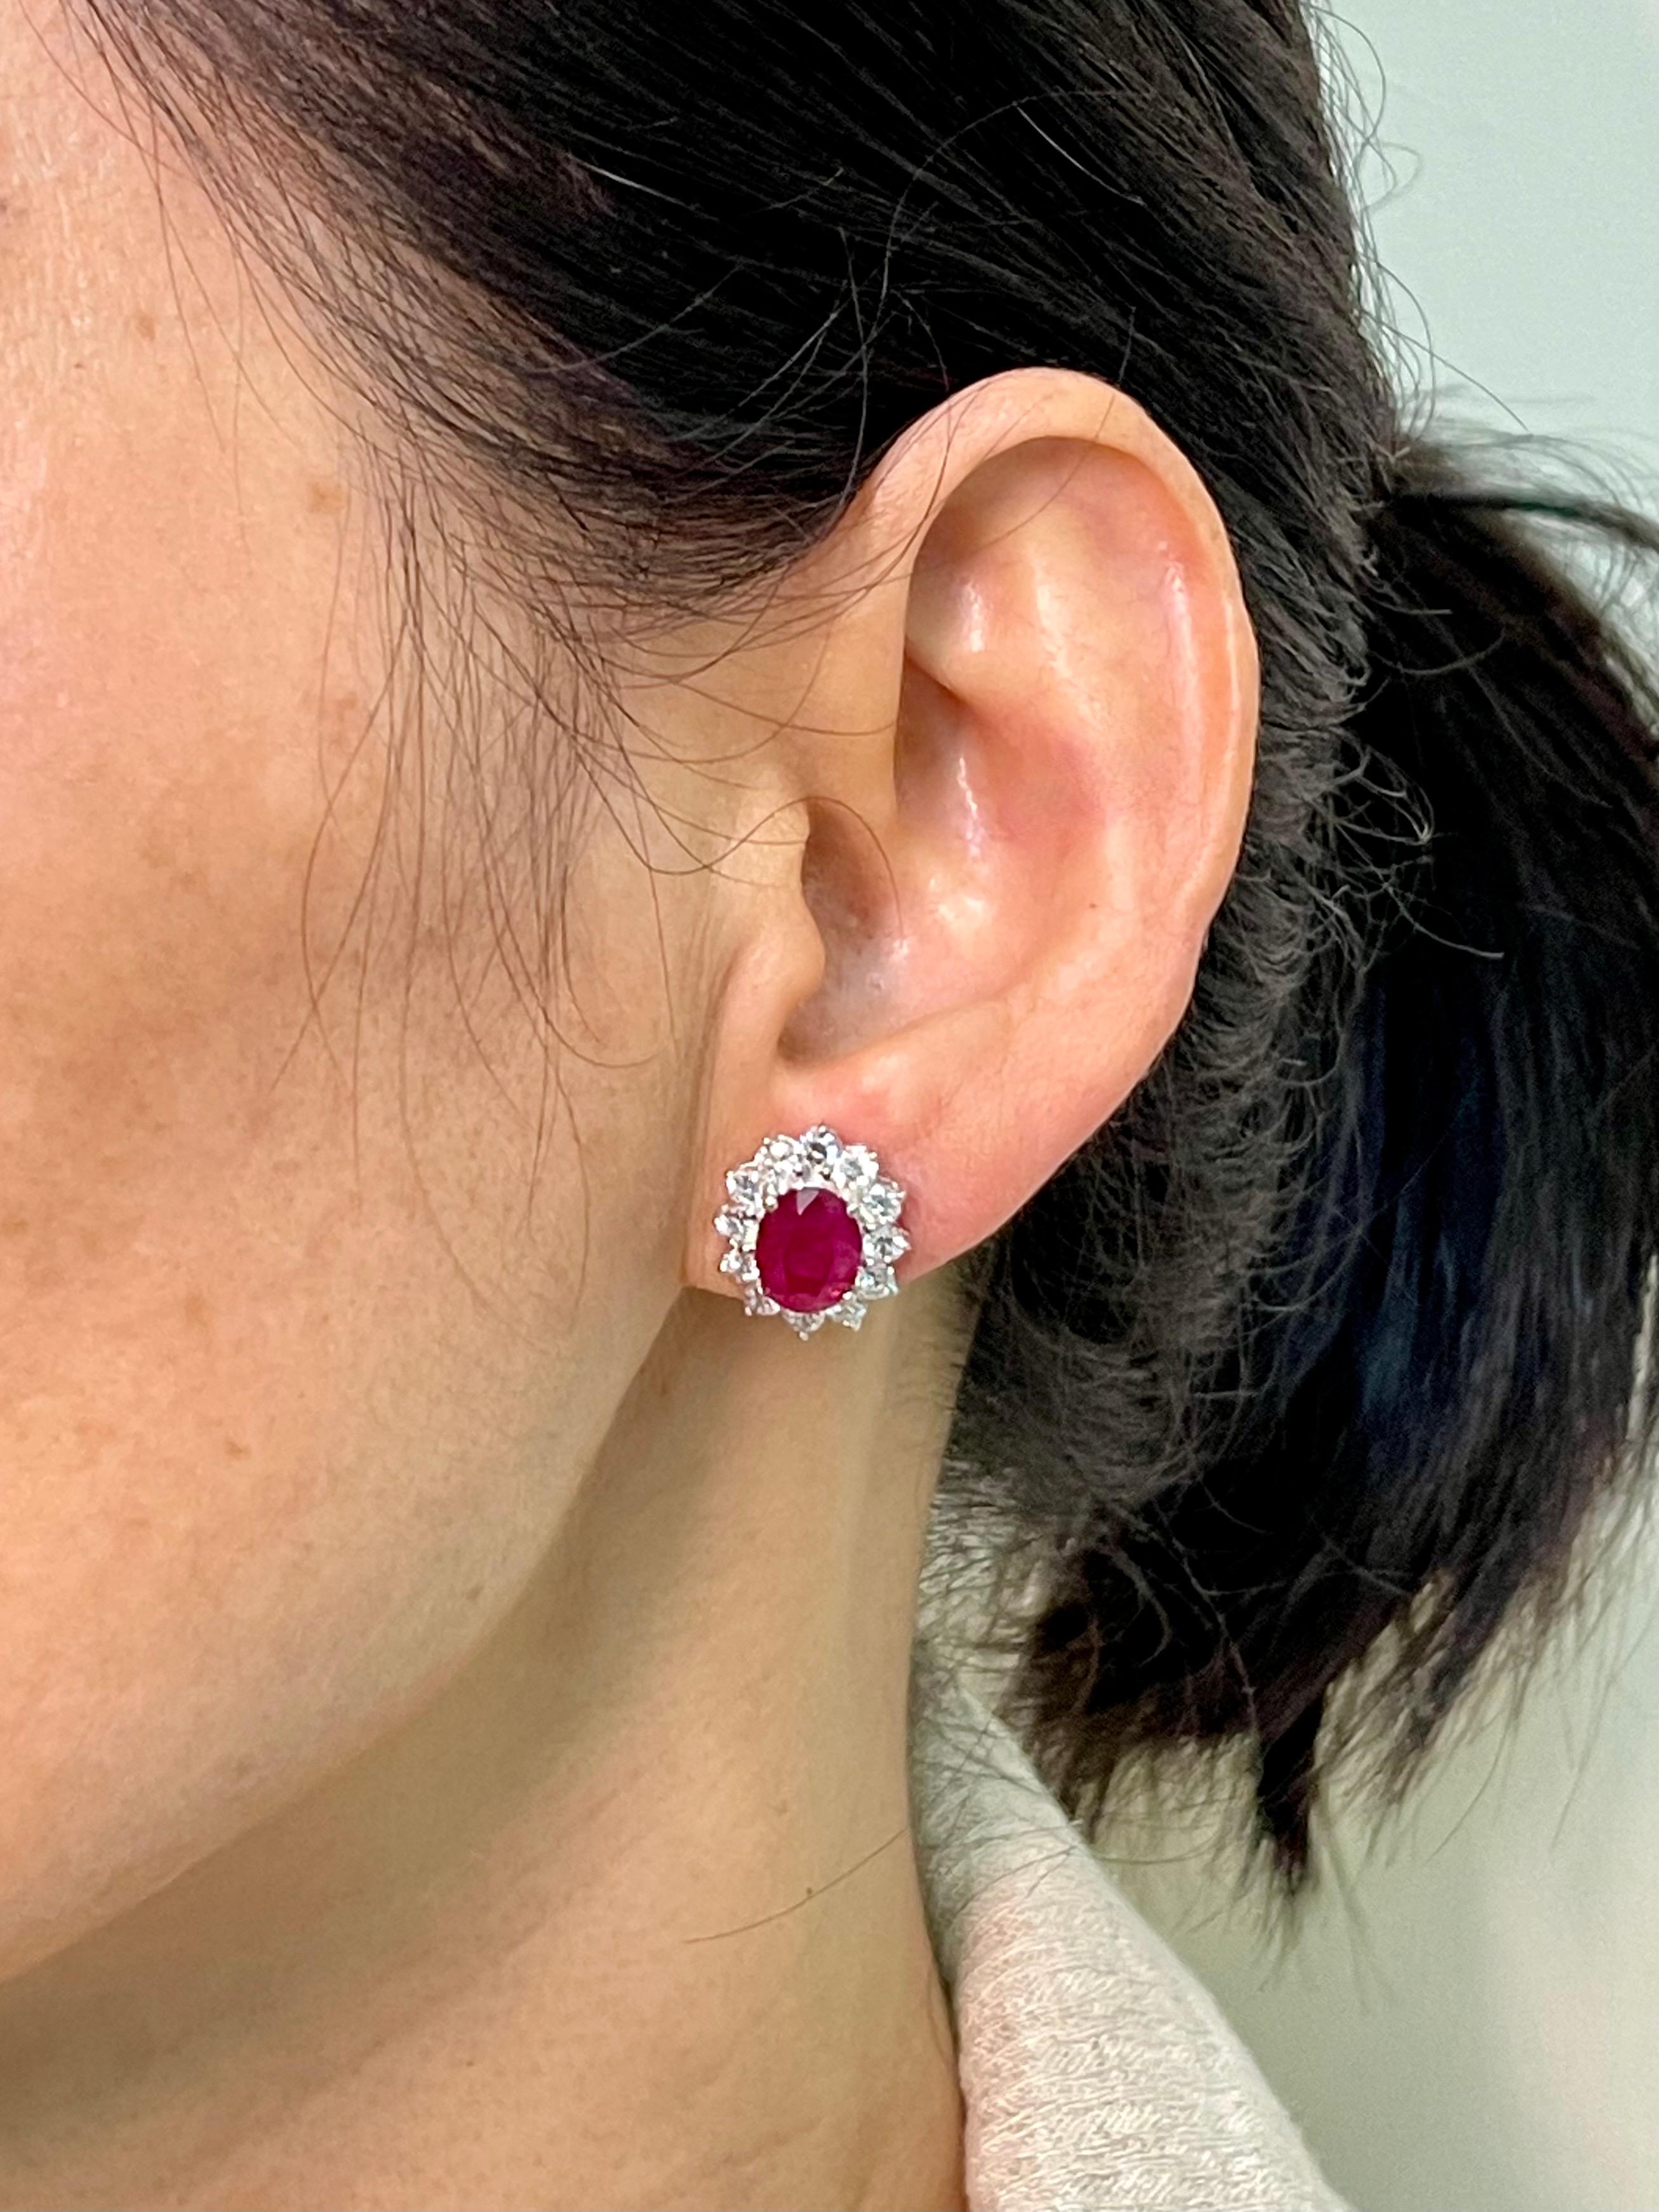 Women's Vivid Red Ruby 4.00 CTW & Diamond Stud Earrings, Close to Pigeon Blood Red